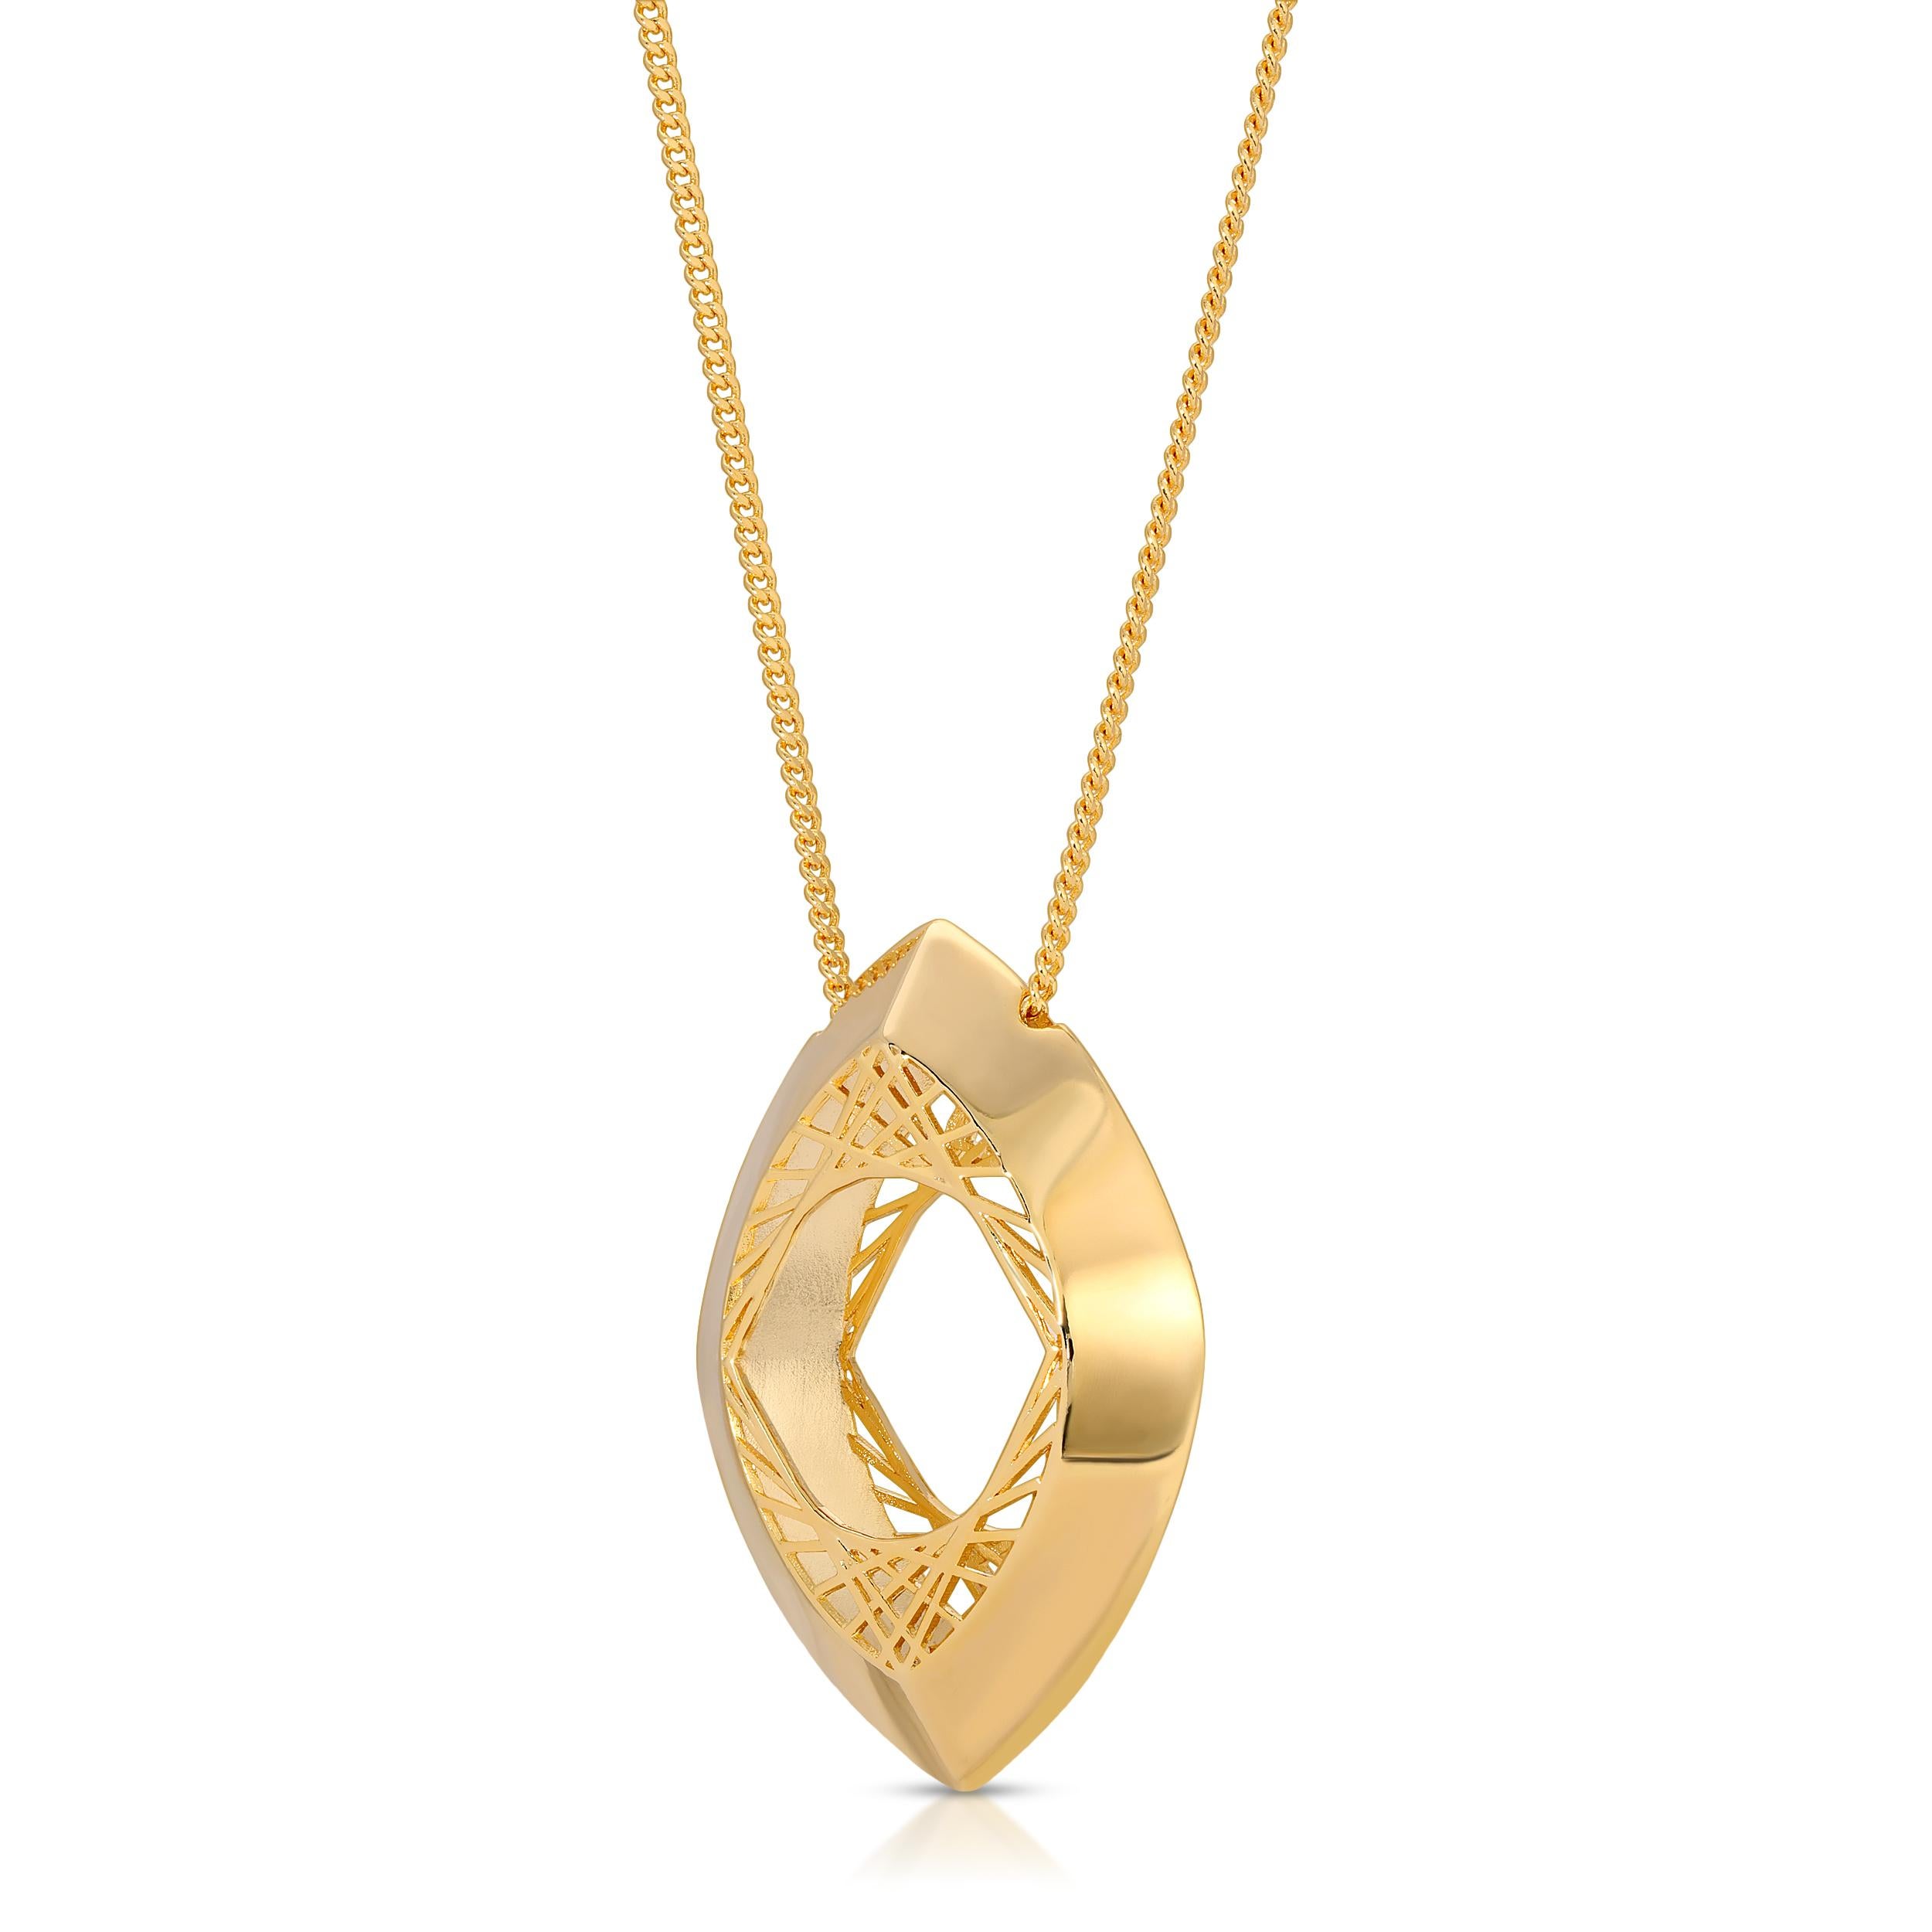 The Freedom Necklace from the Freedom Collection is inspired by Freedom tower in Tehran, Iran. Using mathematics, the detailed geometric pattern is created and finished with smooth and plain outside putting all the attention on the inside.

This